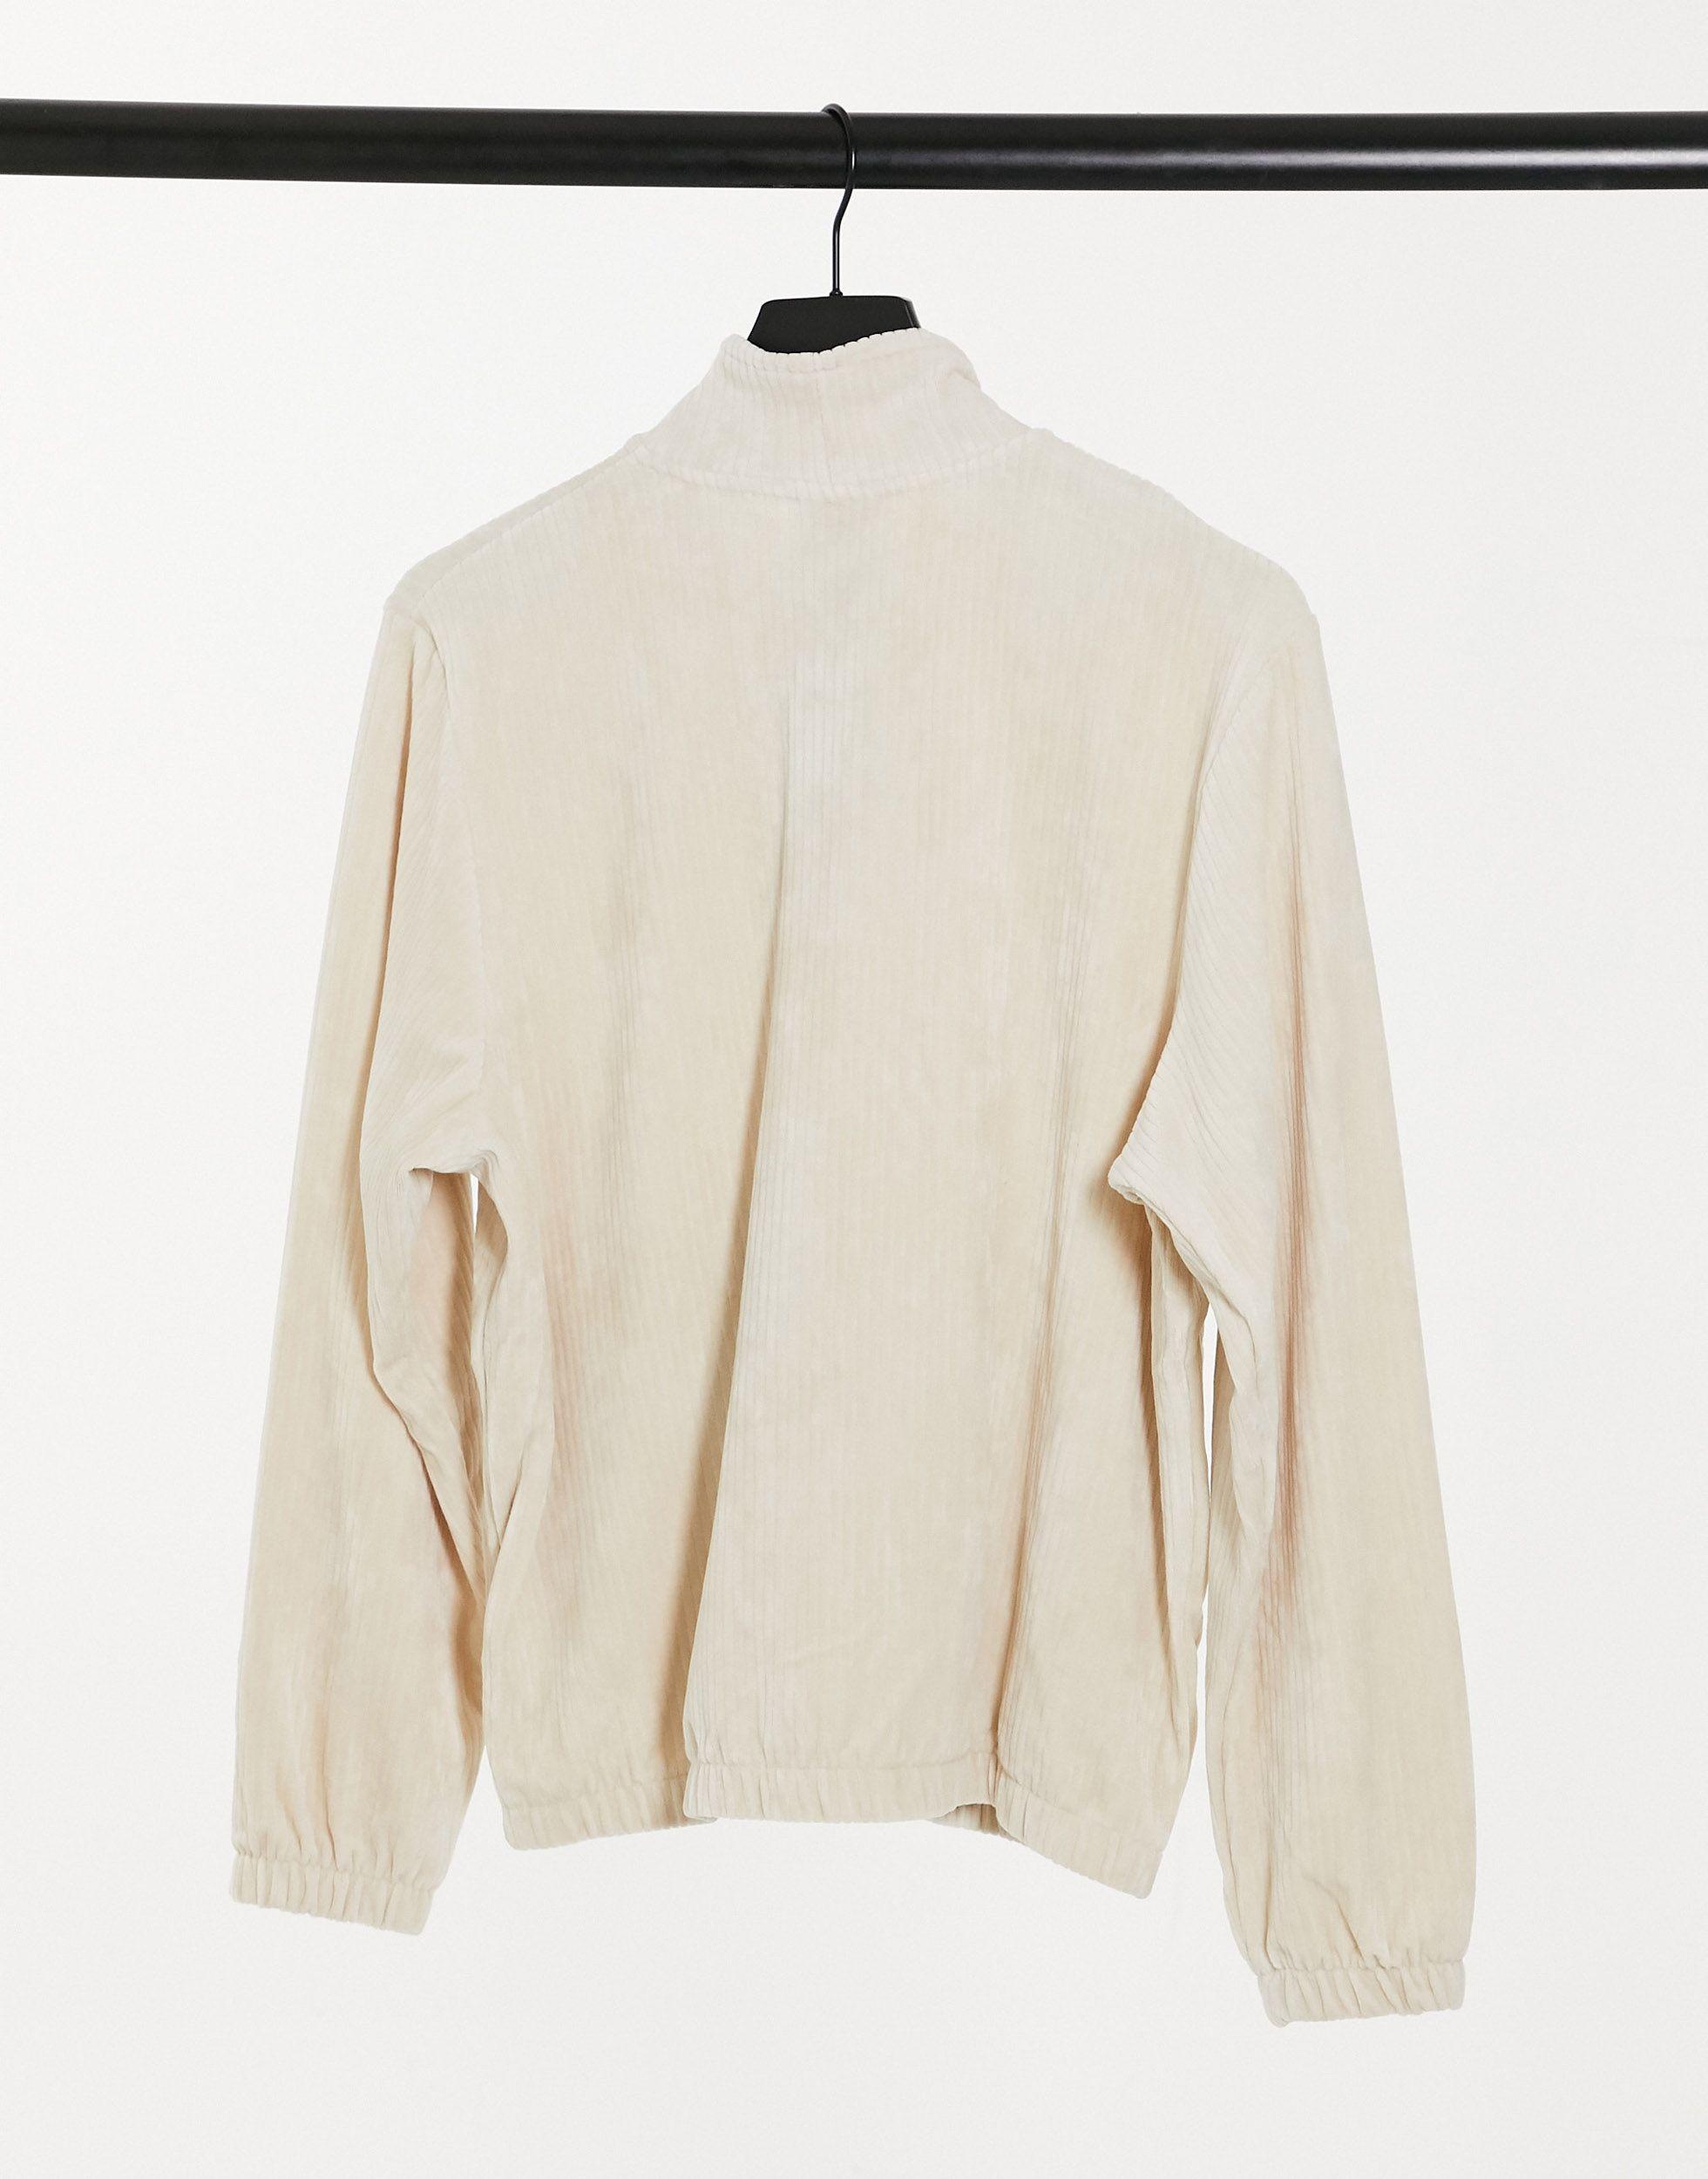 Nike Cotton Cord Jacket in Oatmeal (Natural) | Lyst Australia